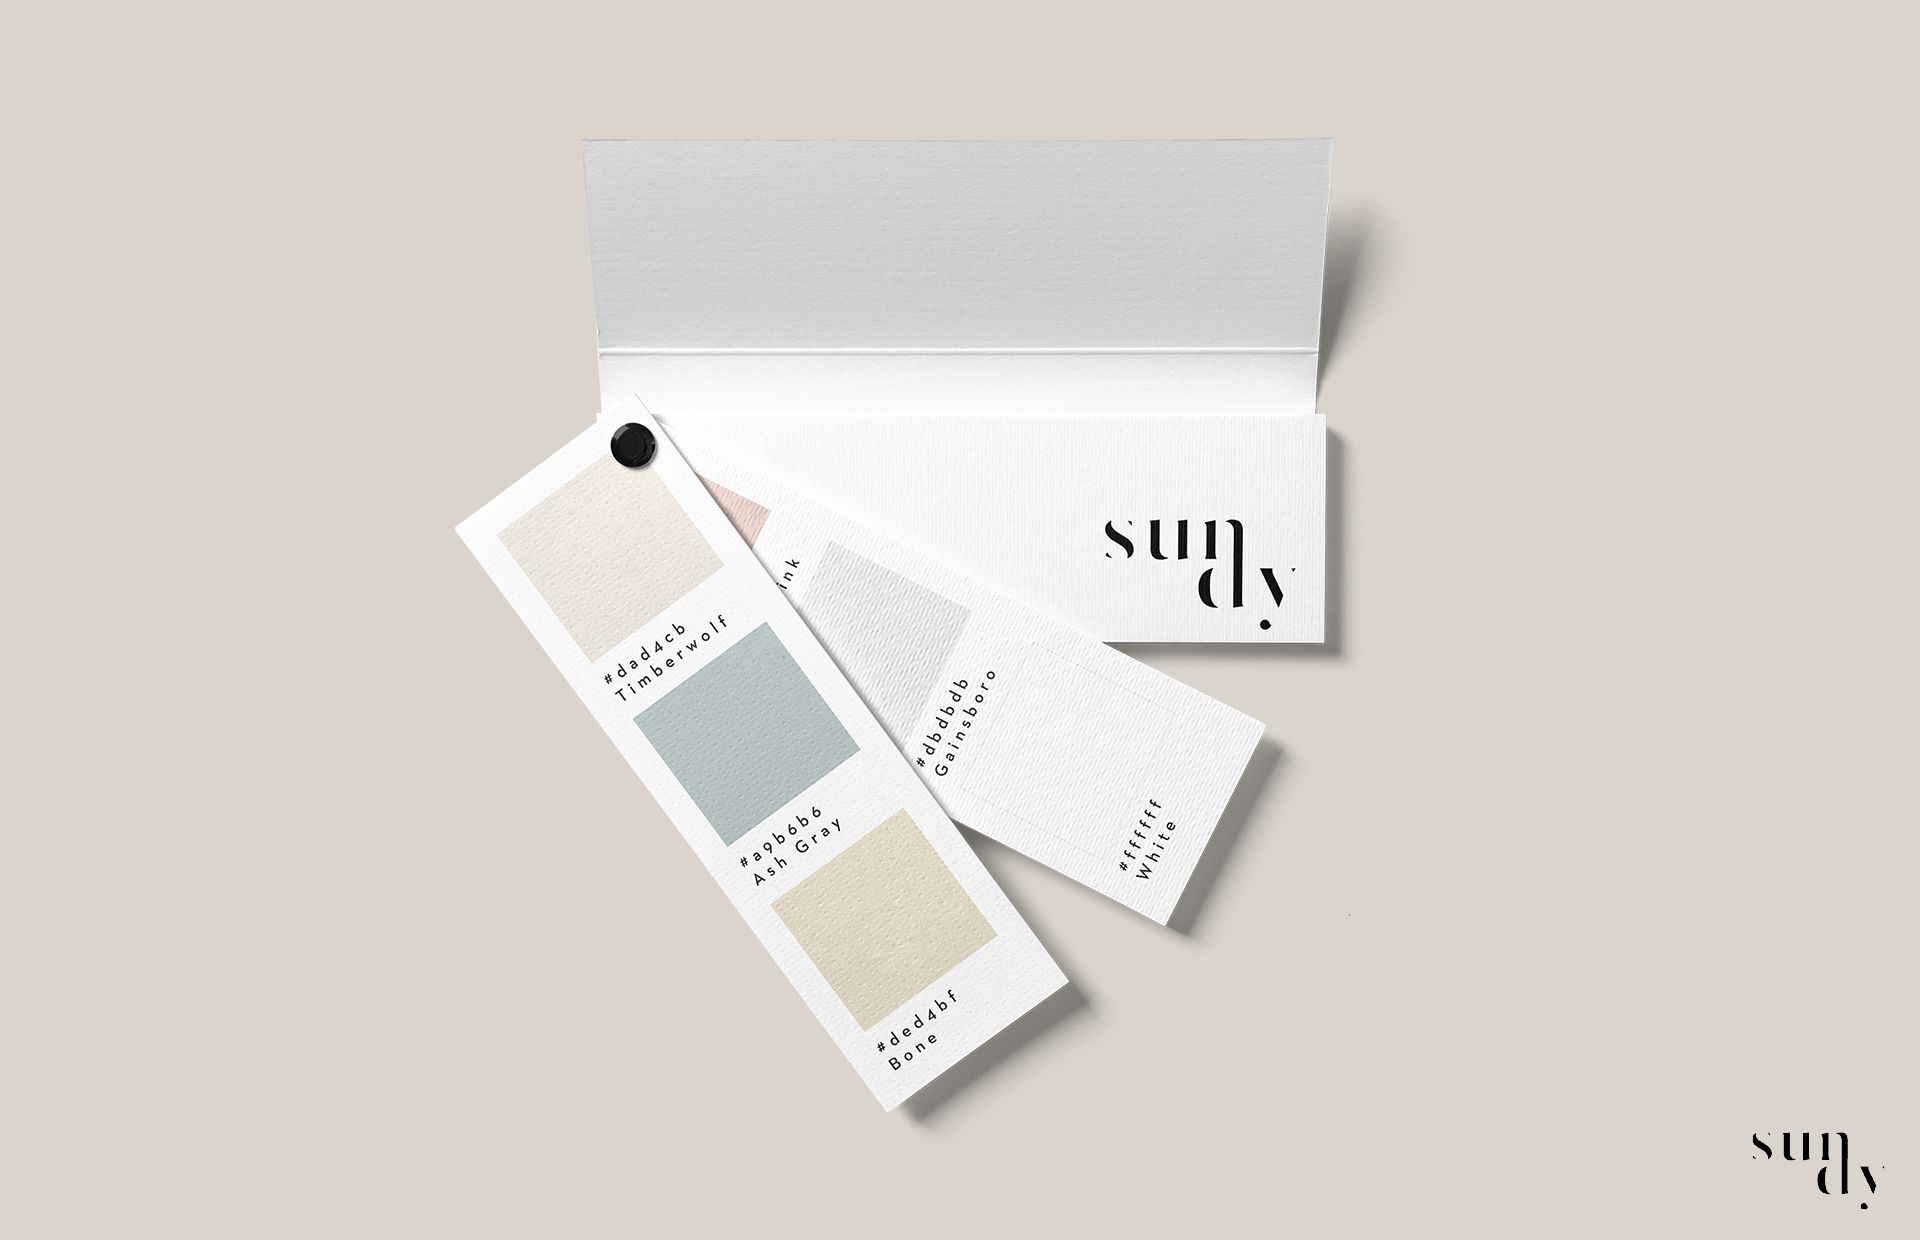 Final colour palette designed for SundySkin for a soft and warm personality. By Tom Matthews @novacreate